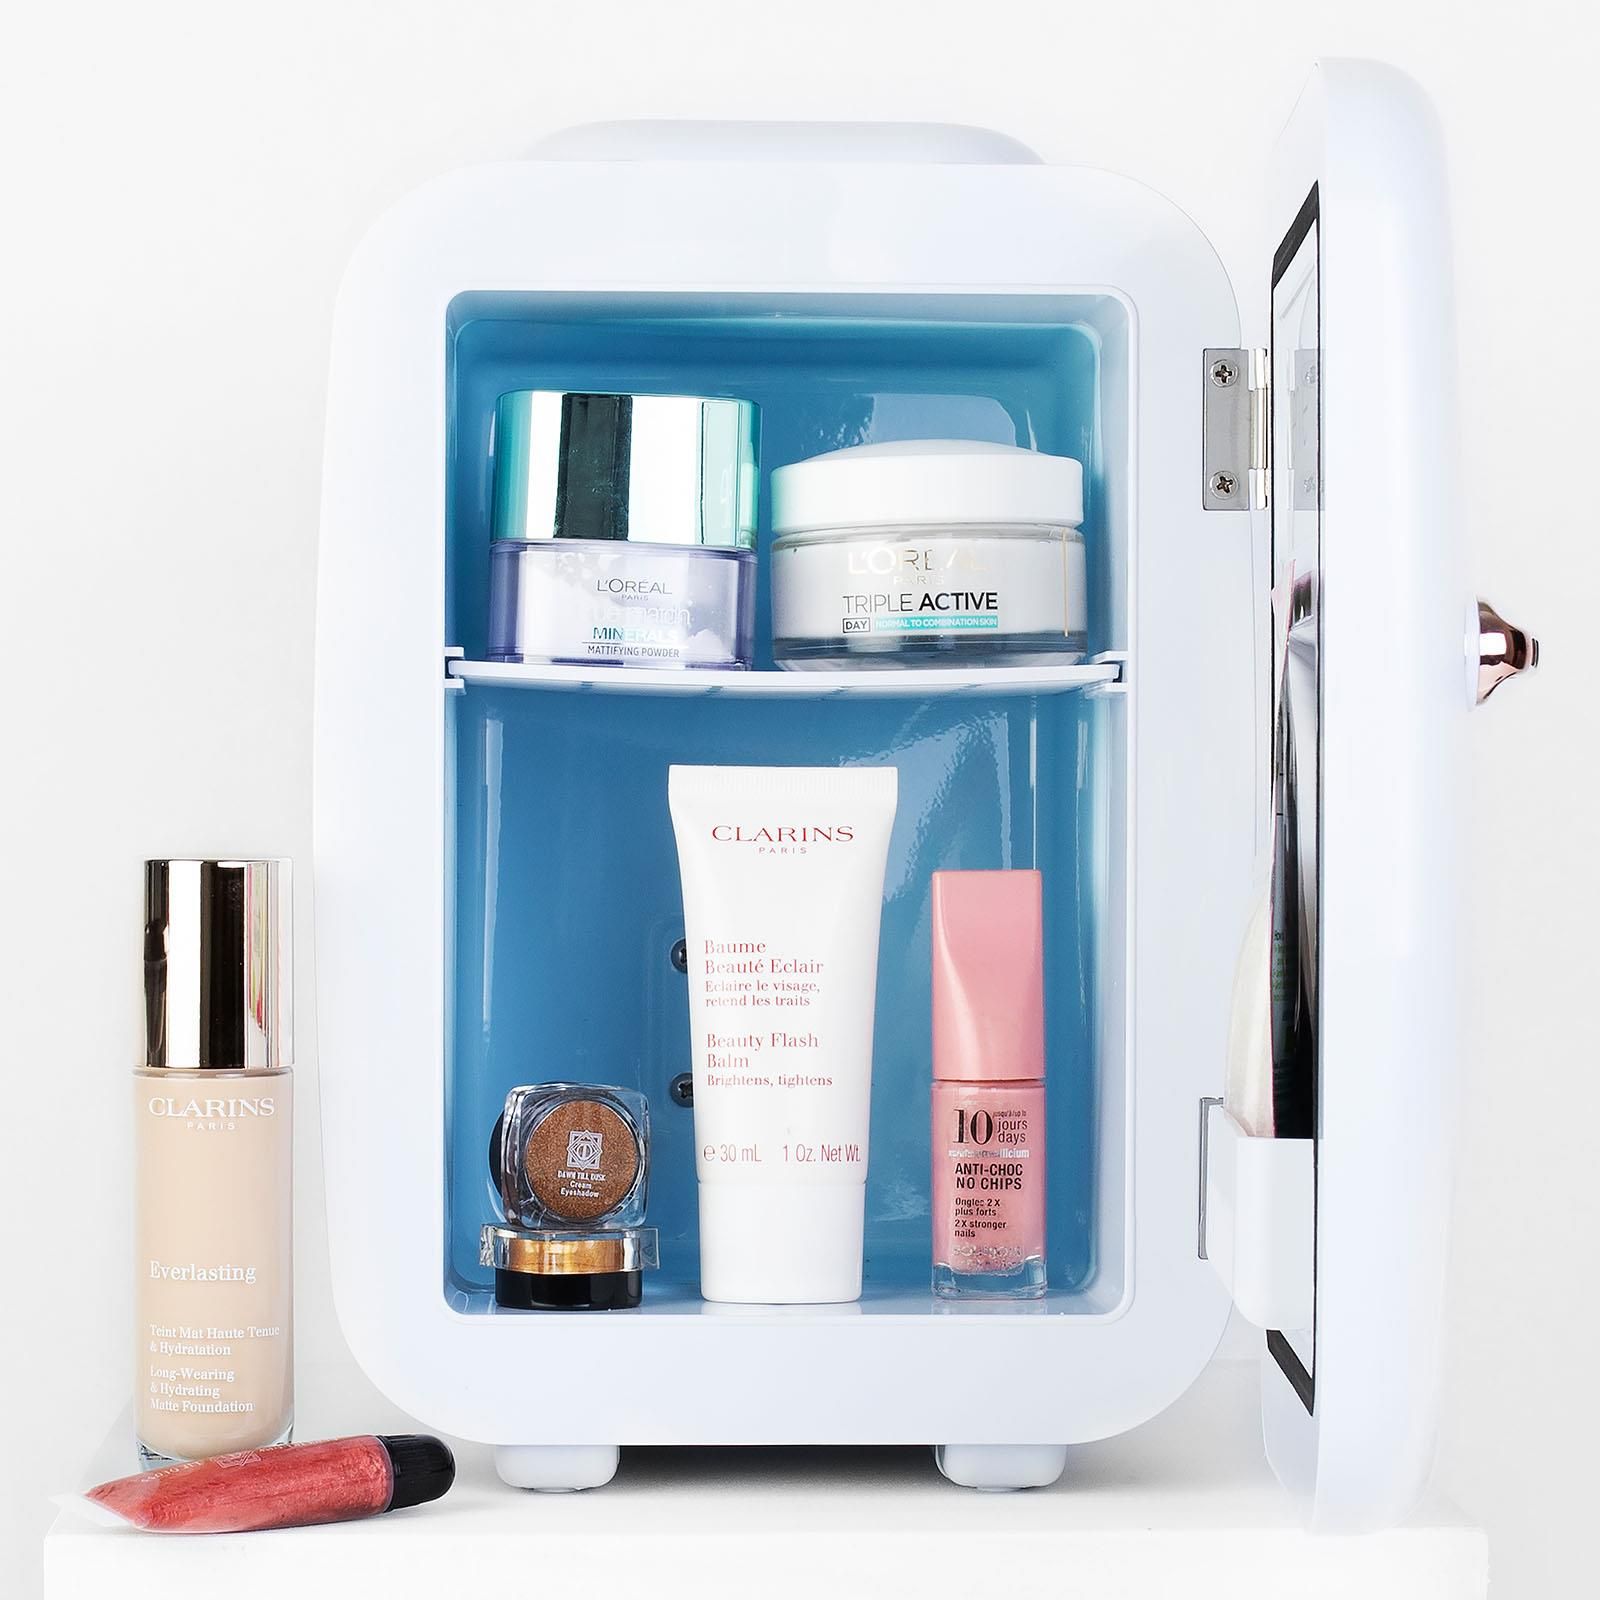 Keep your skincare and cosmetics fresher for longer with the envie Mini Beauty Fridge.  Helping to extend shelf life of your beauty products and reducing harmful bacteria, the cooling function is also ideal for maintaining cold snacks and beverages. 

Cooling products up to 20 degrees below room temperature, the fridge is sized to suit most skincare products, canned drinks and small drink cartons.

Key Features:
Removeable middle and door shelves
Thermoelectric system switches from cooling to warming
Warming function ideal for maintaining warm snacks and hot drinks
Suitable for bedrooms, office, camping, cars, caravans, boats
Stash your treats – perfect for student rooms and offices.  Keep your personal stash away from the hands of others!
Can hold up to 4 litres